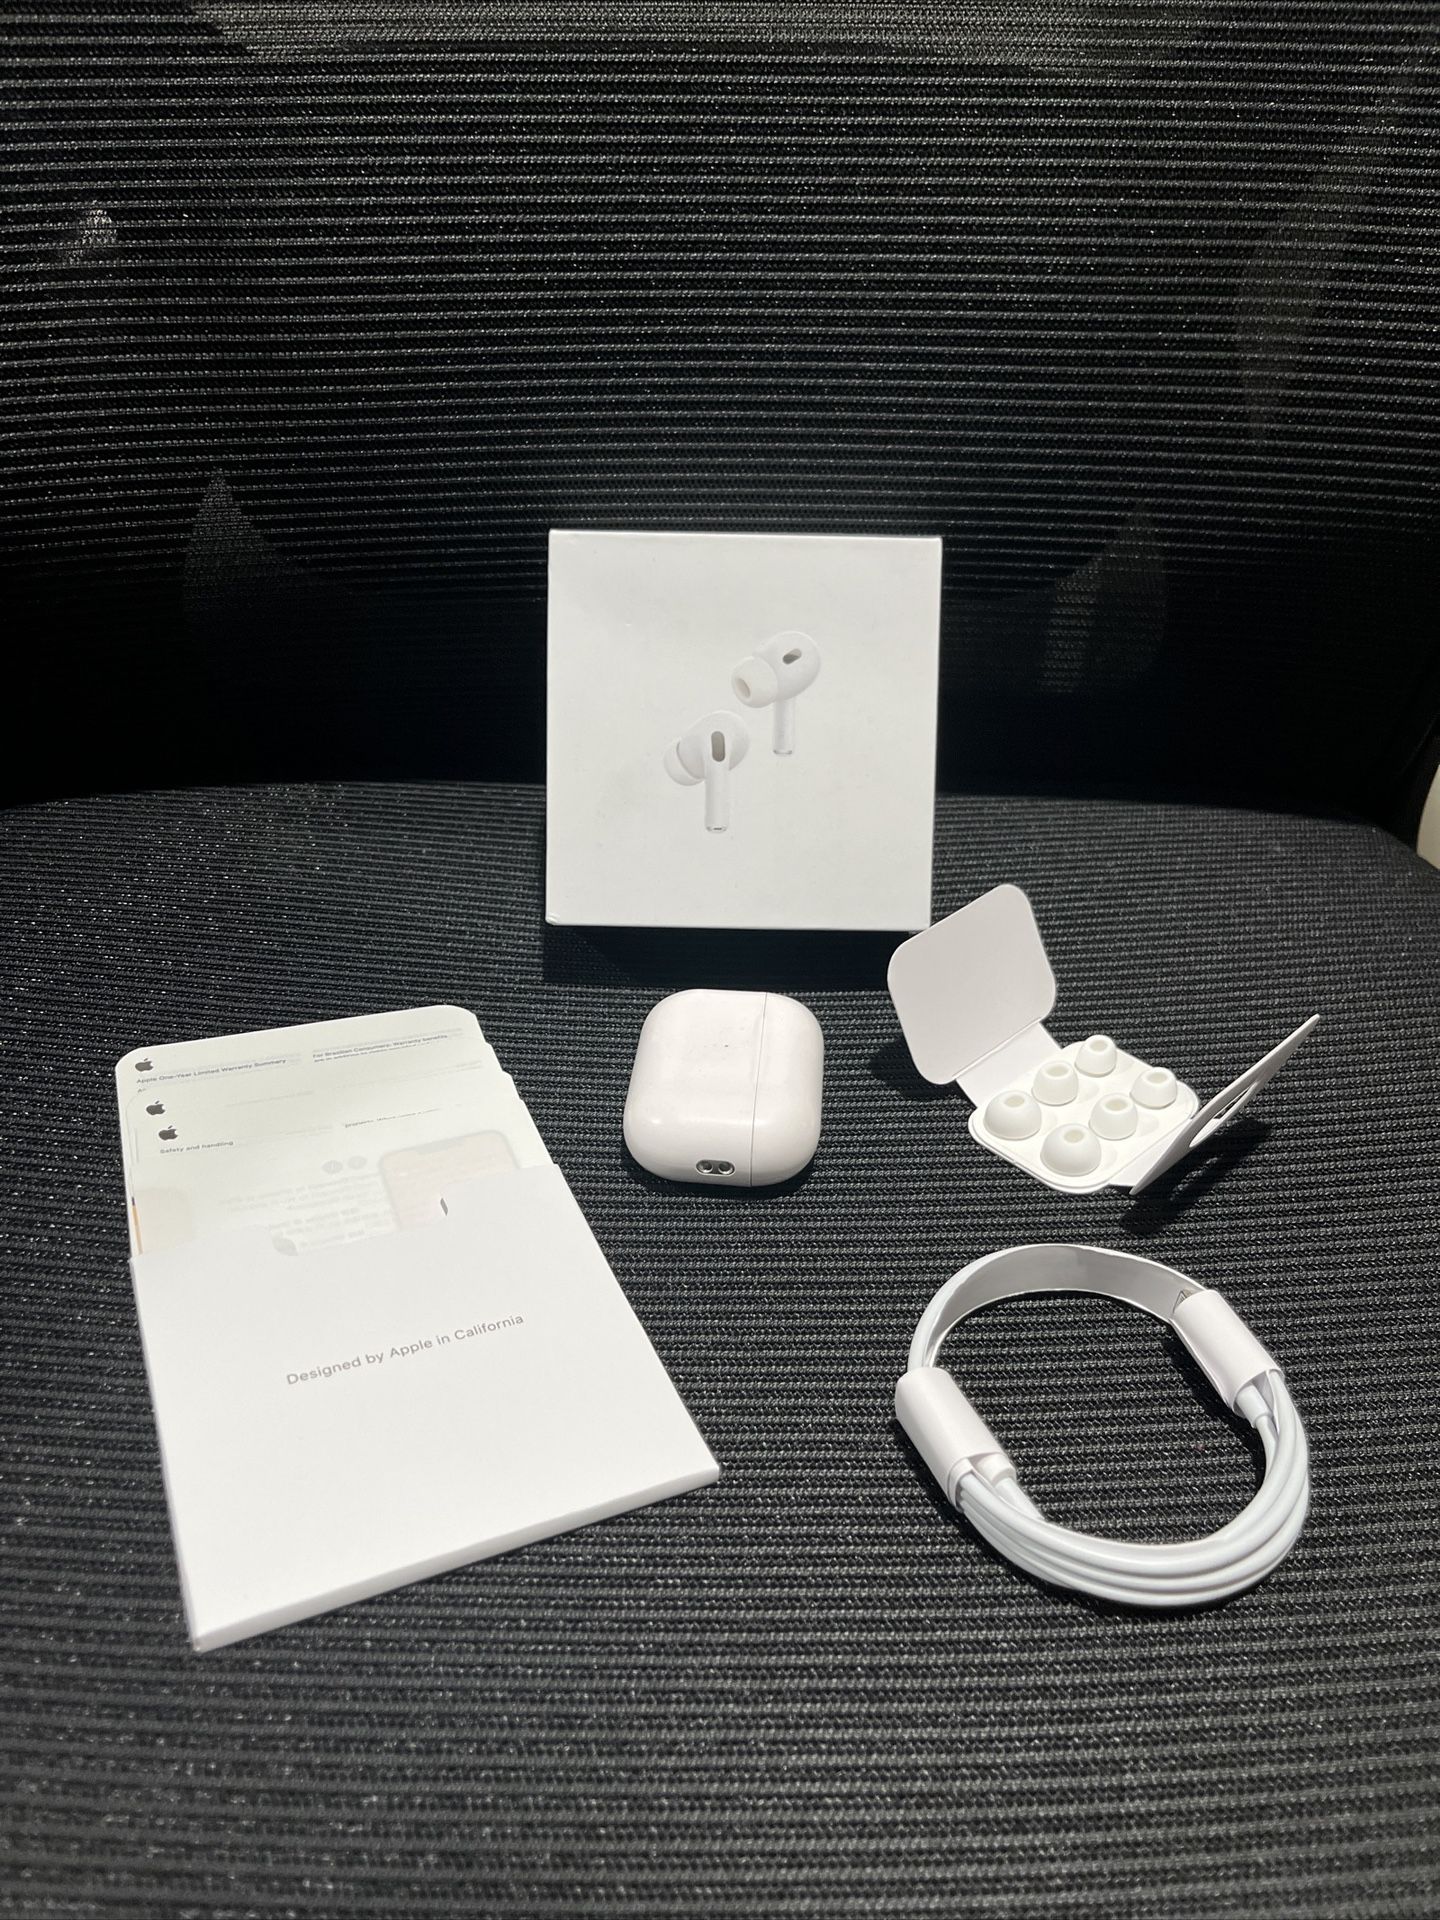 *NEW* AirPods Pro 2nd Generation 